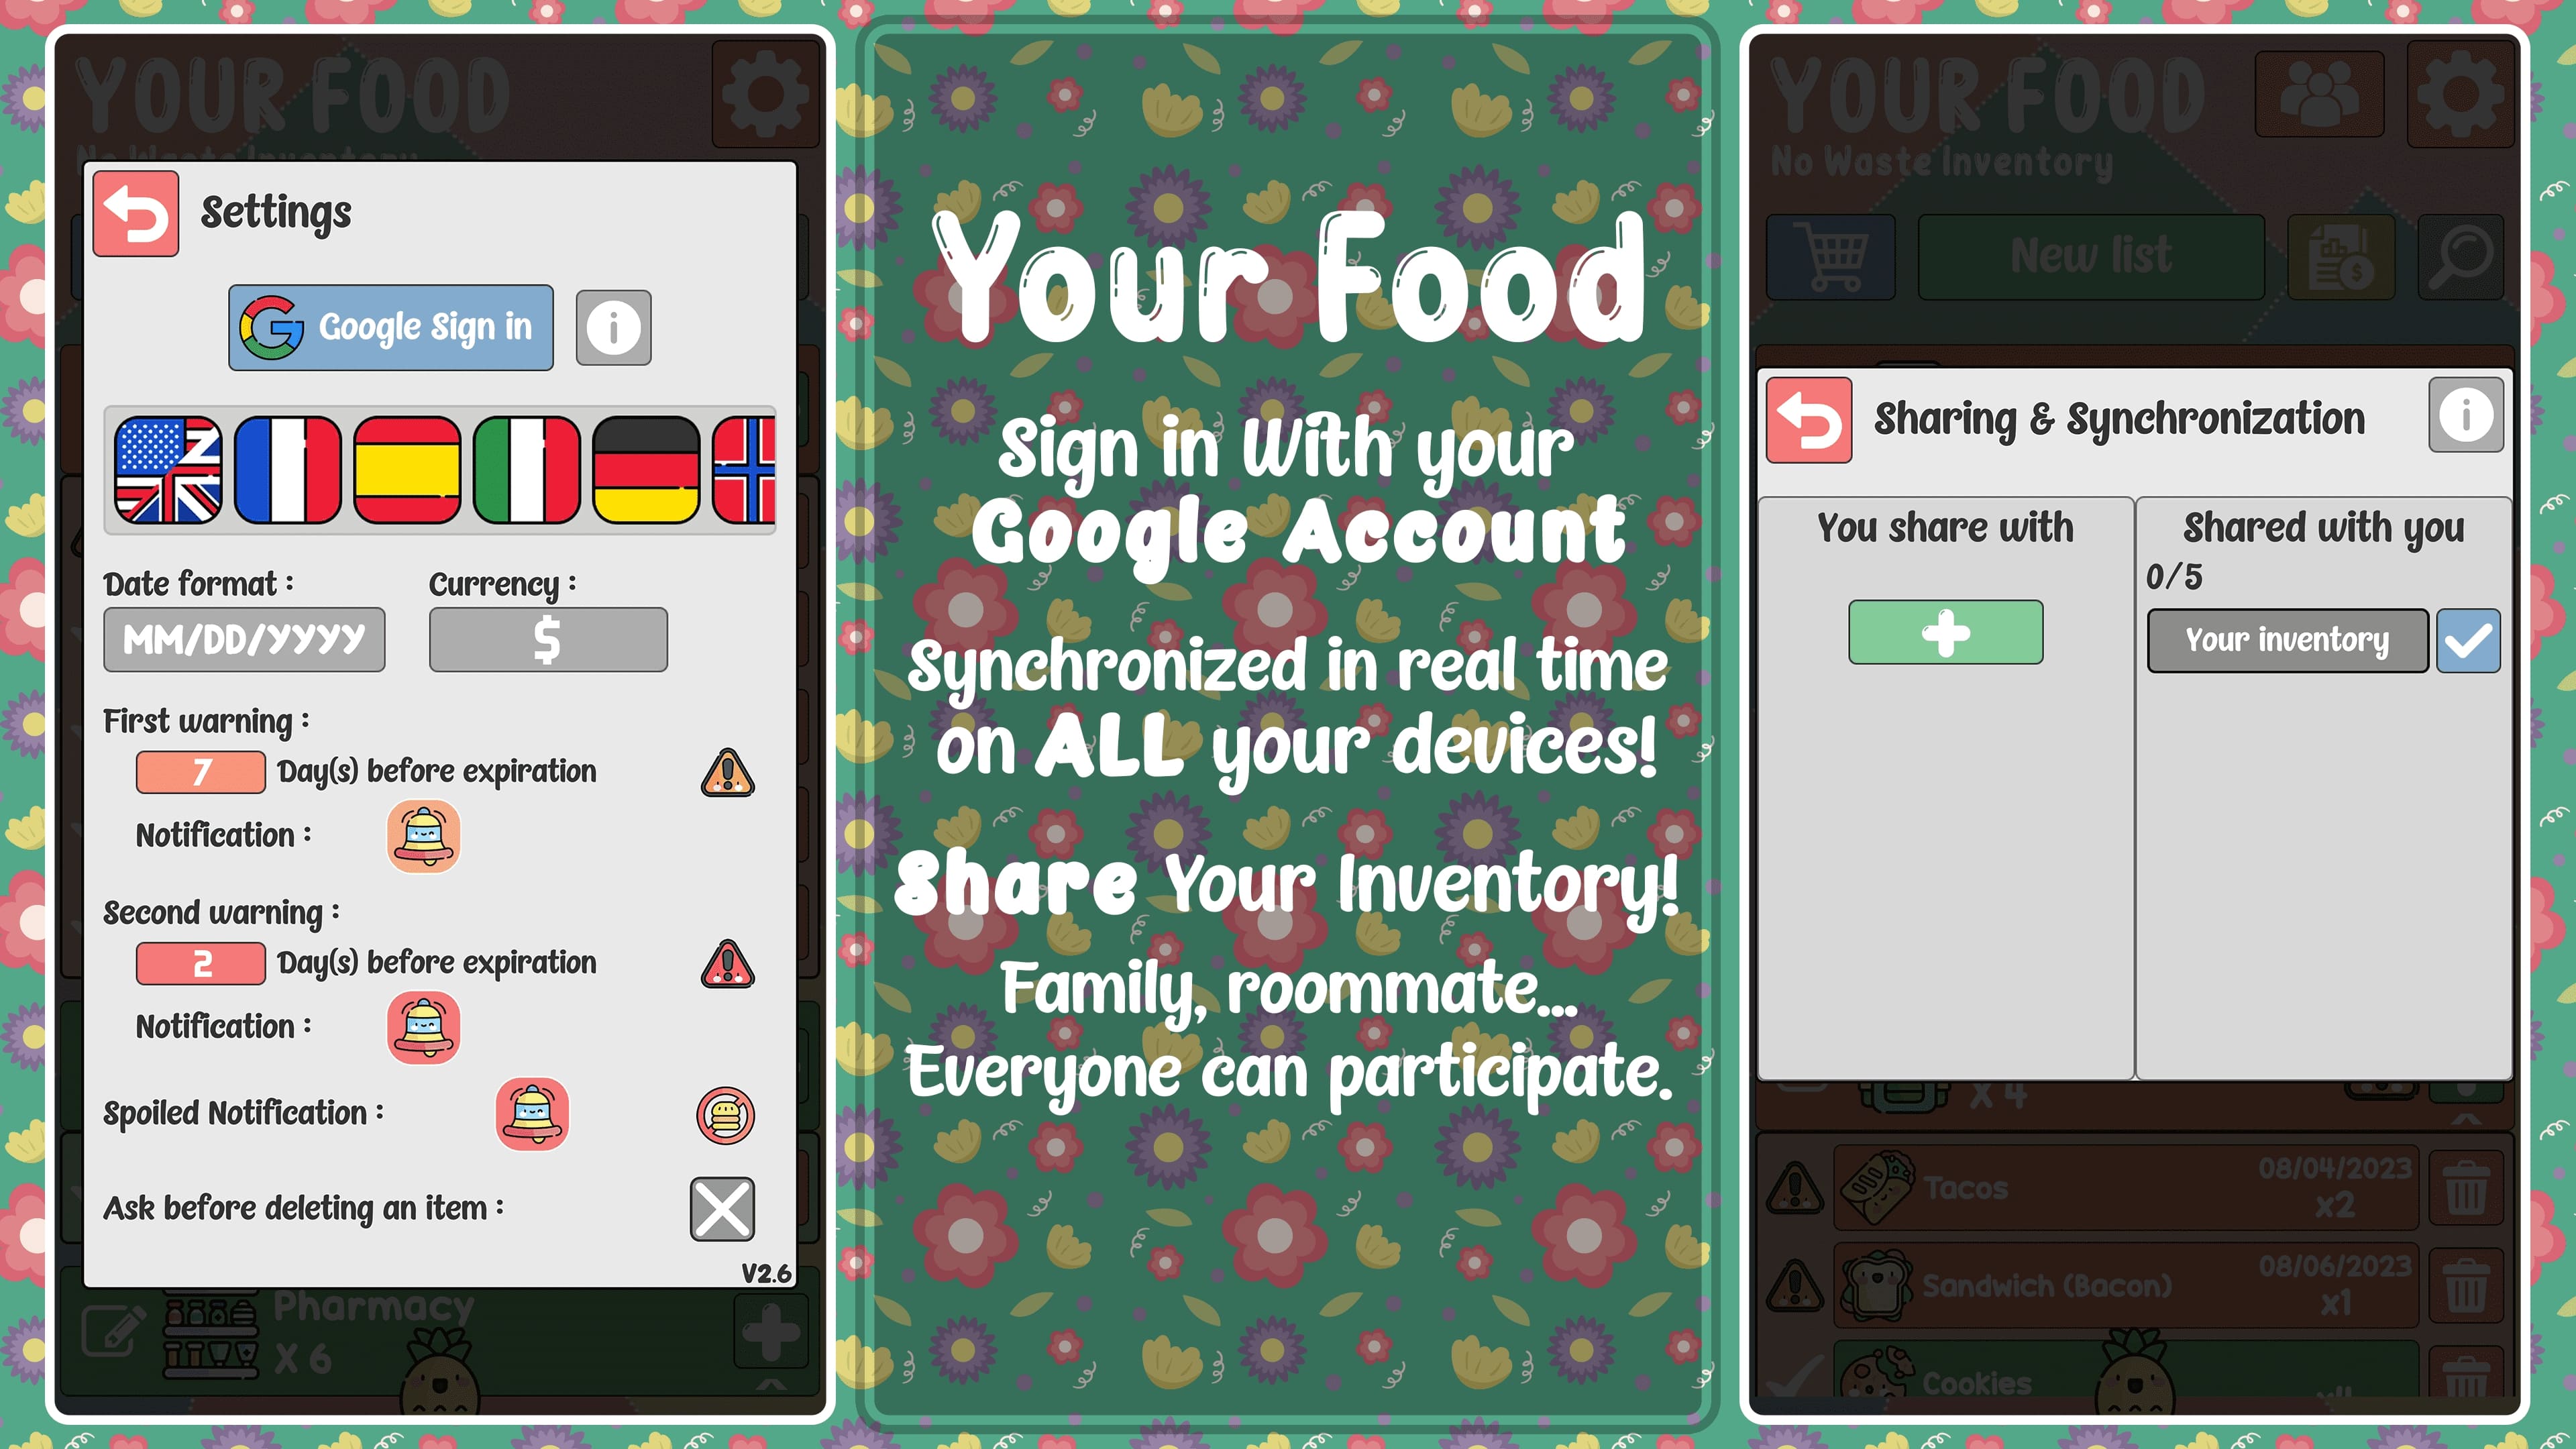 Your Food - No Waste Inventory - 1920 x 1080 Screen 8